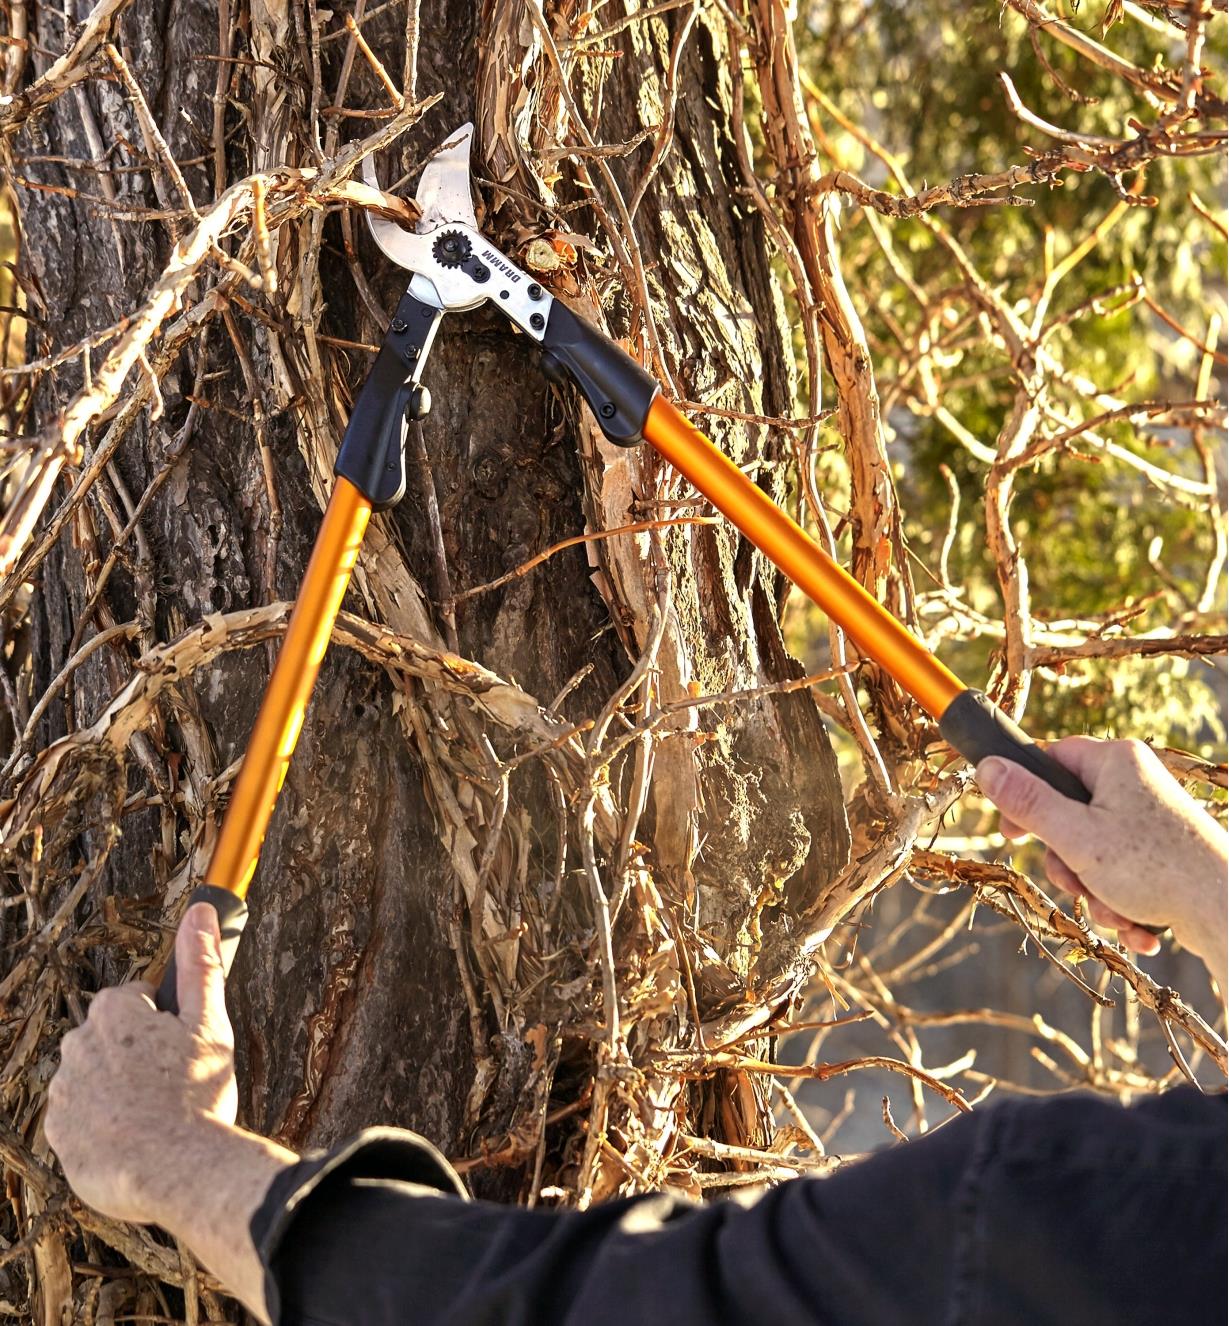 A man uses the bypass loppers to cut vines growing around the trunk of a tree